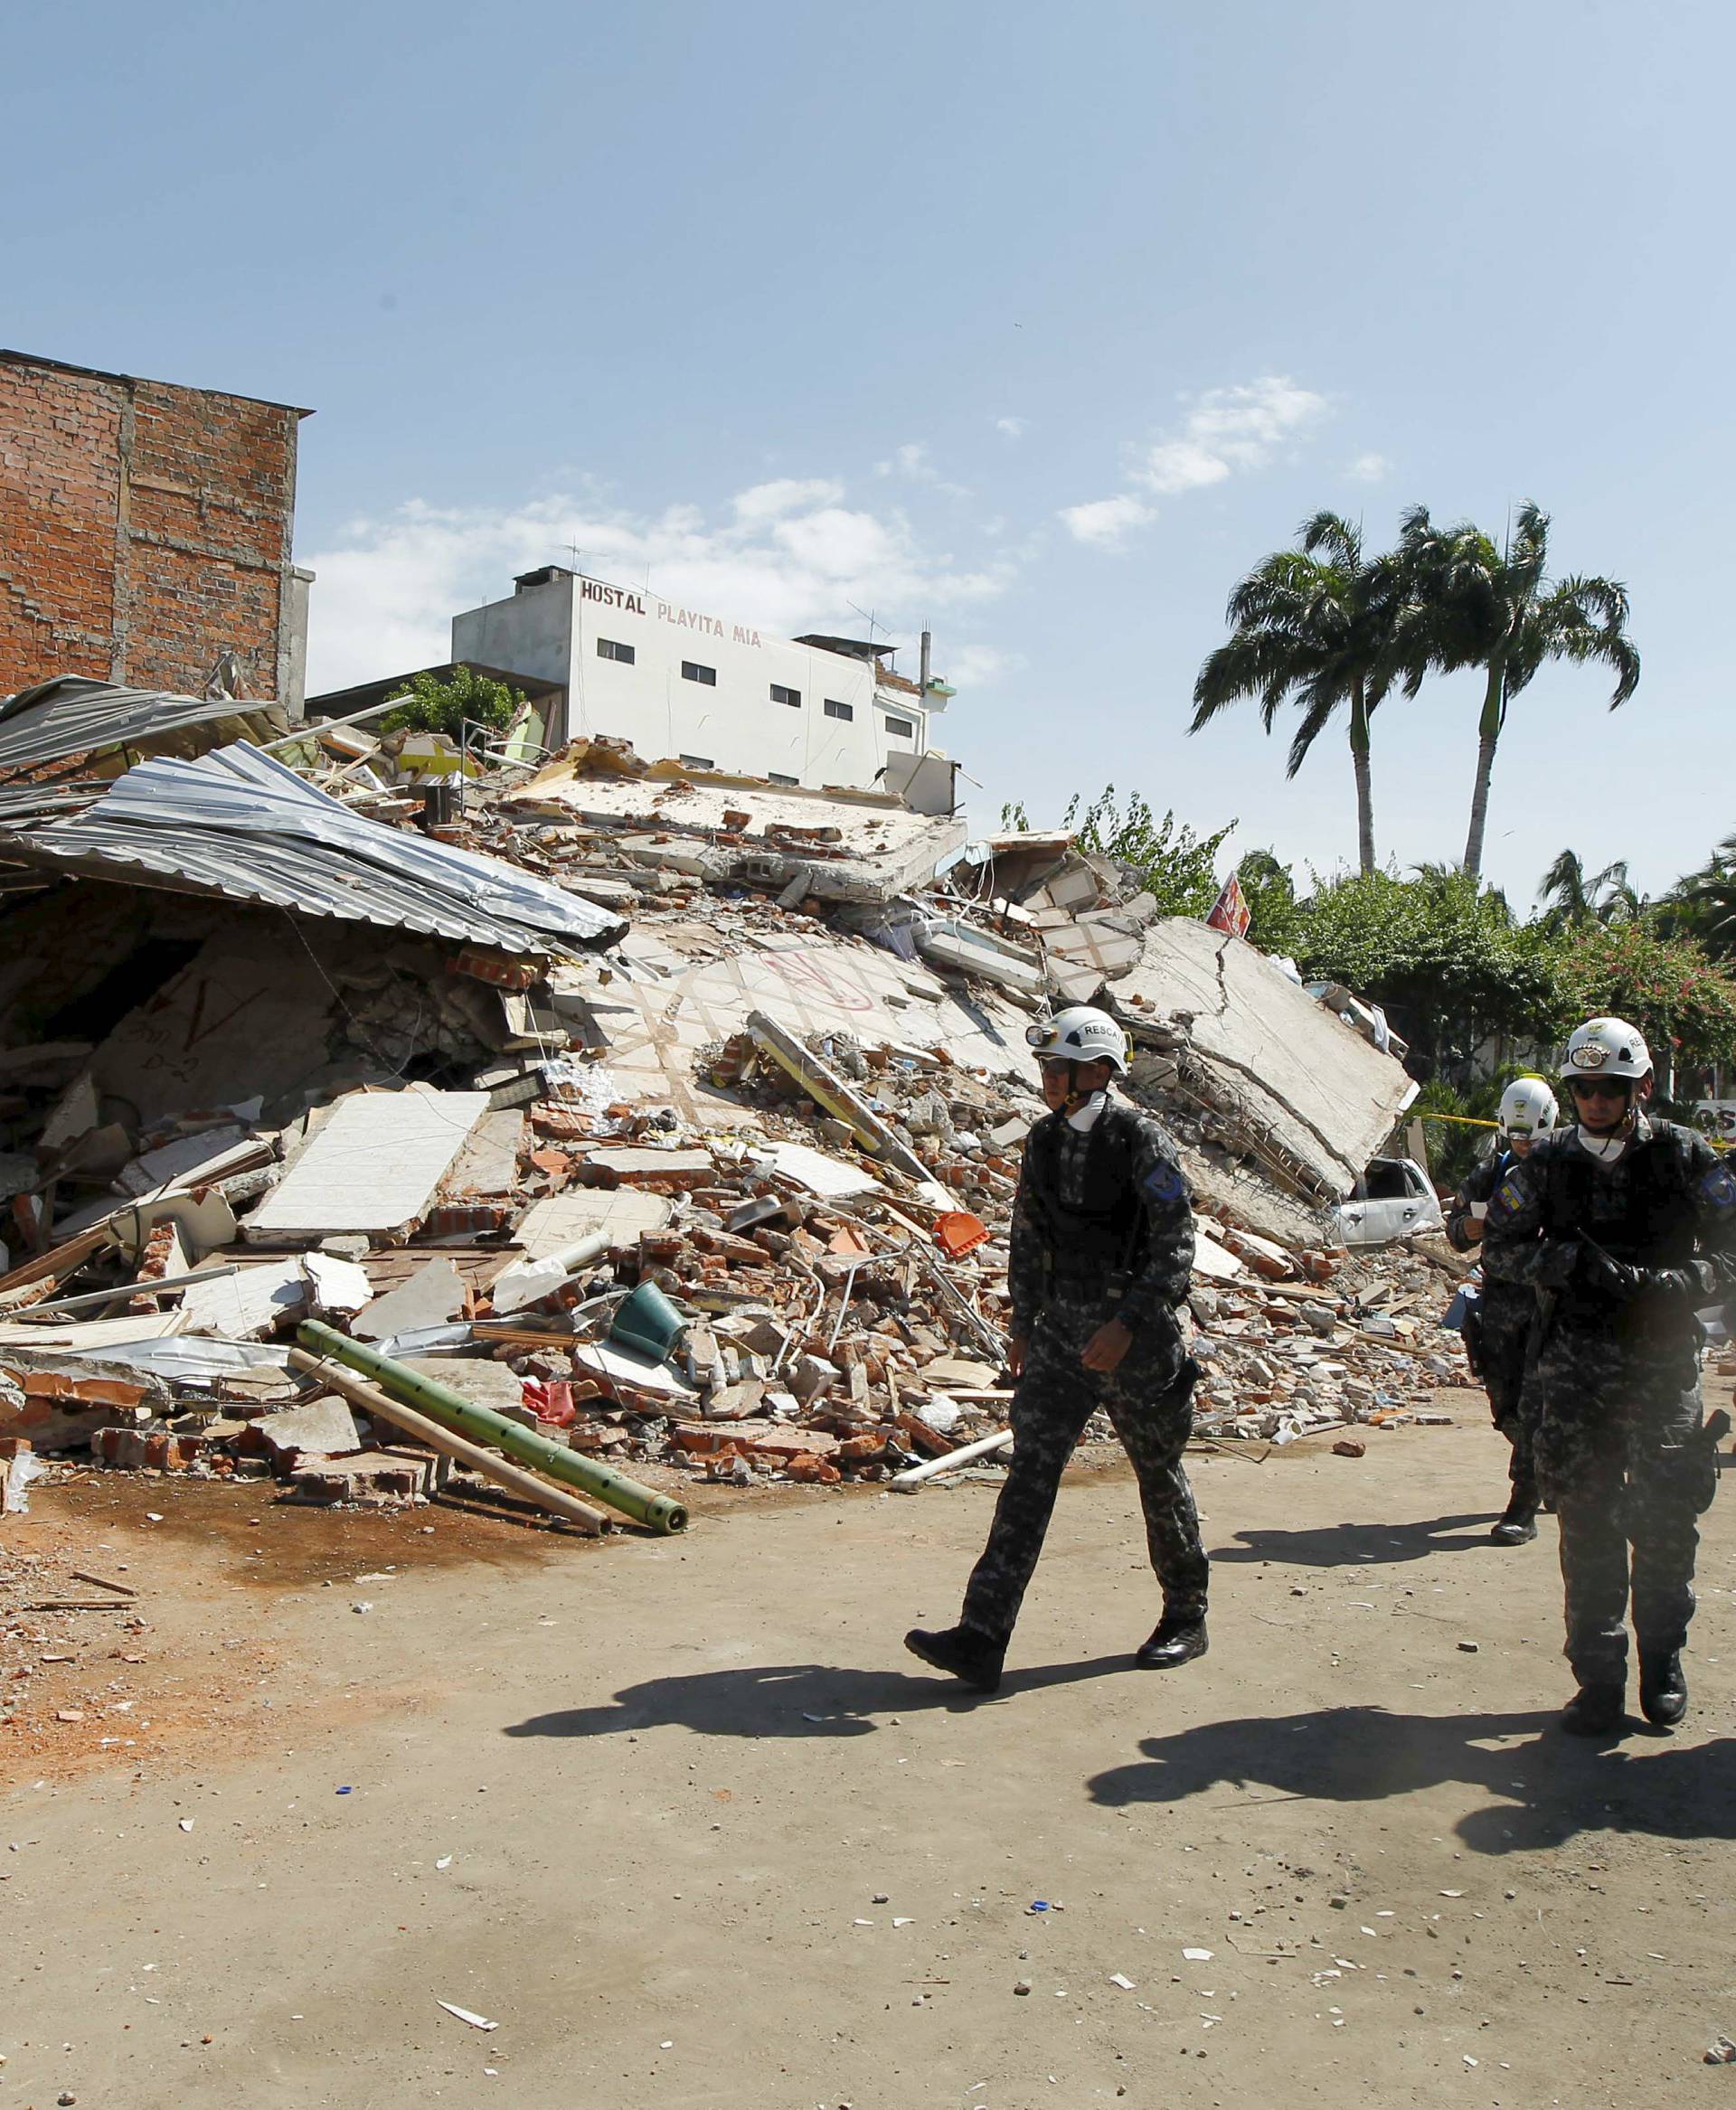 A view of the damage and debris on the streets after an earthquake in Manta